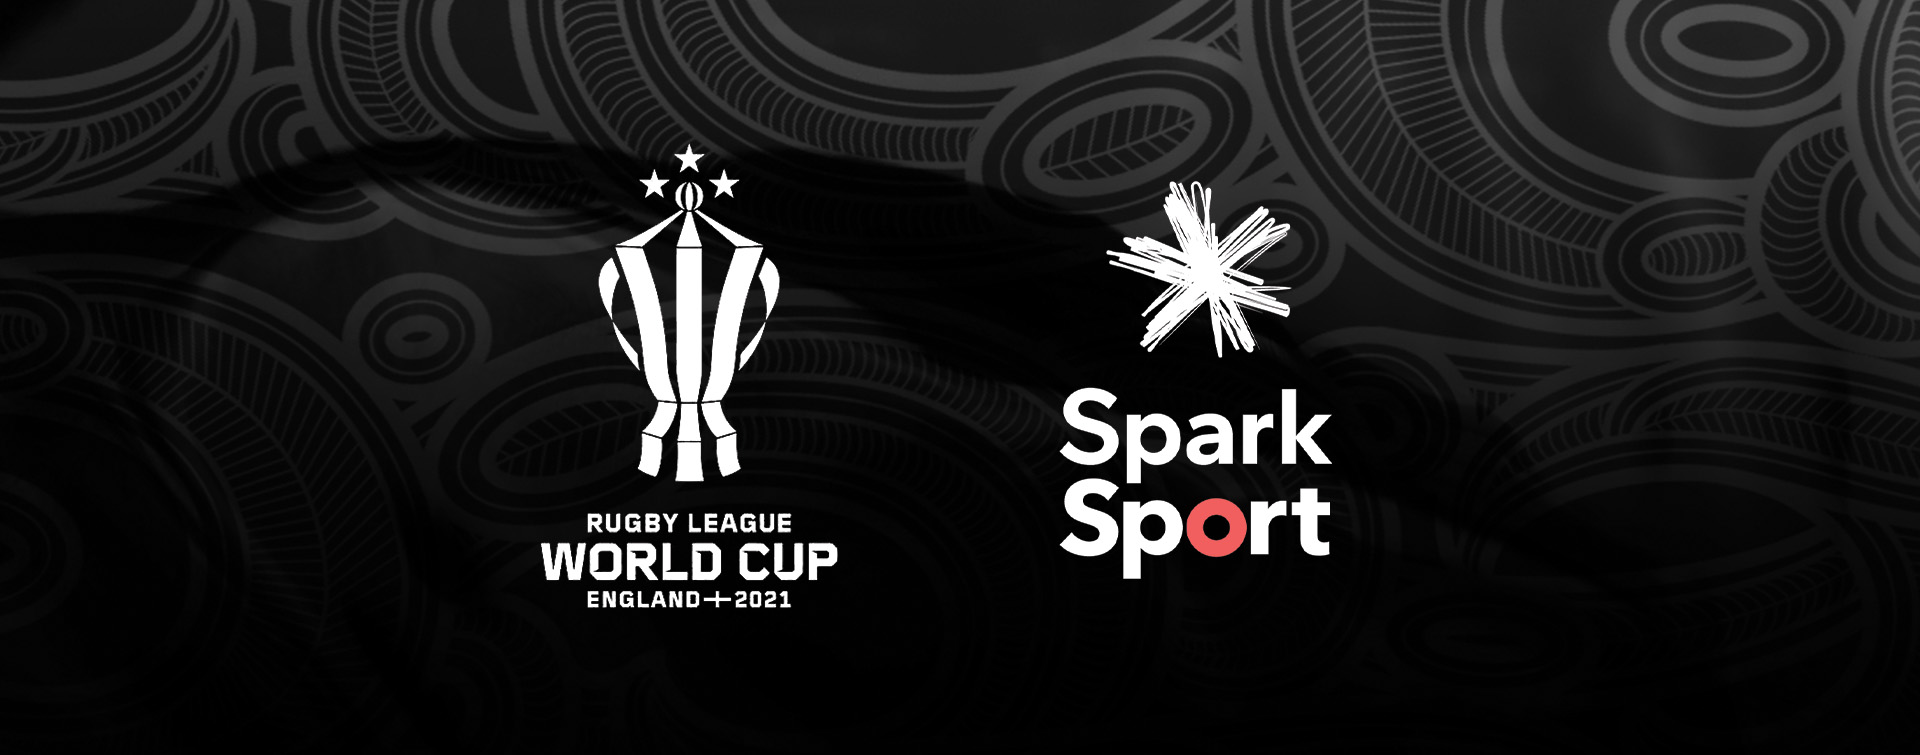 rugby league world cup where to watch